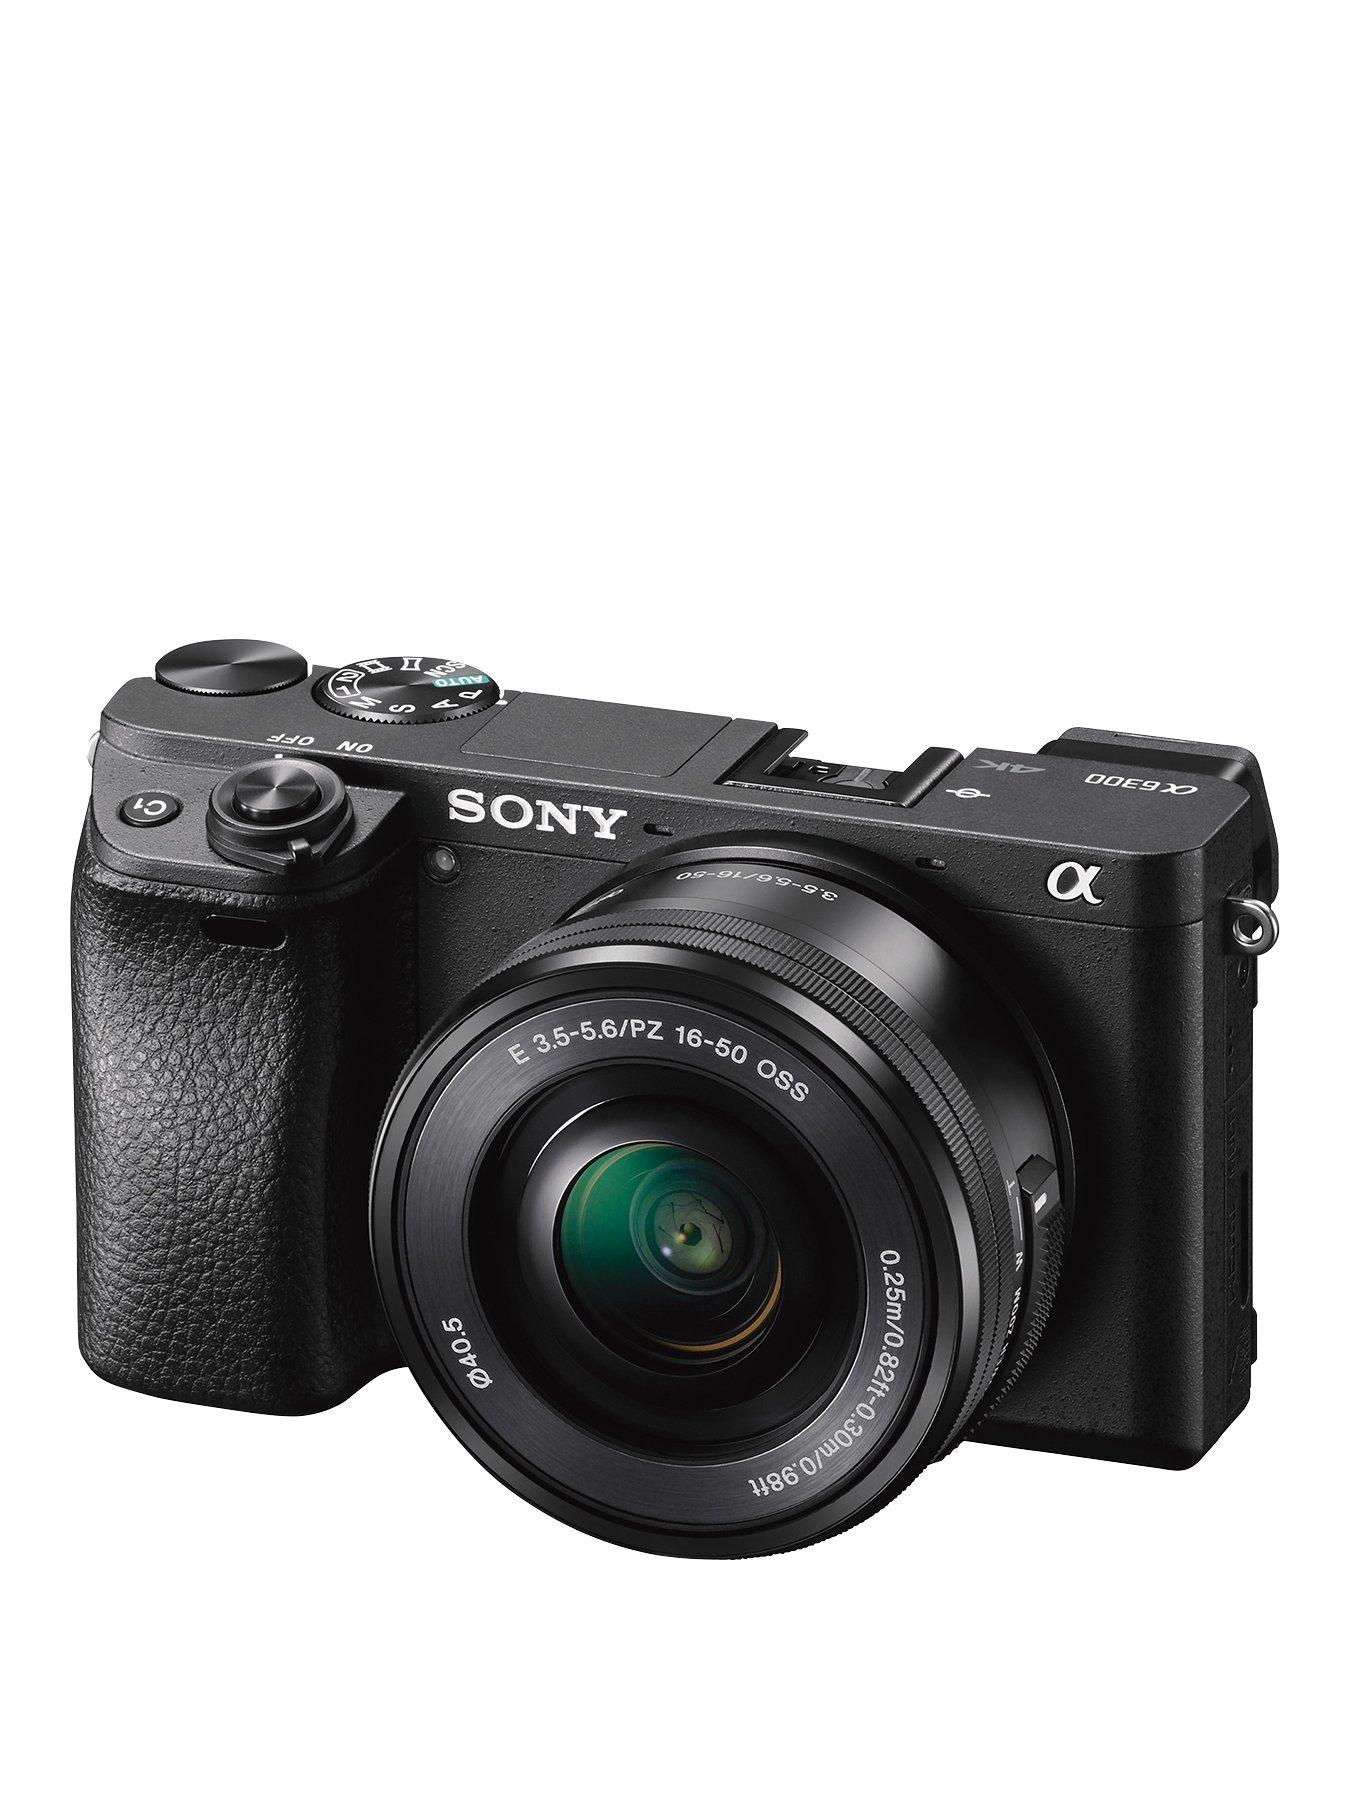 Sony A6300 Compact System 24.2 Megapixel Camera (With 16-50Mm Lens)